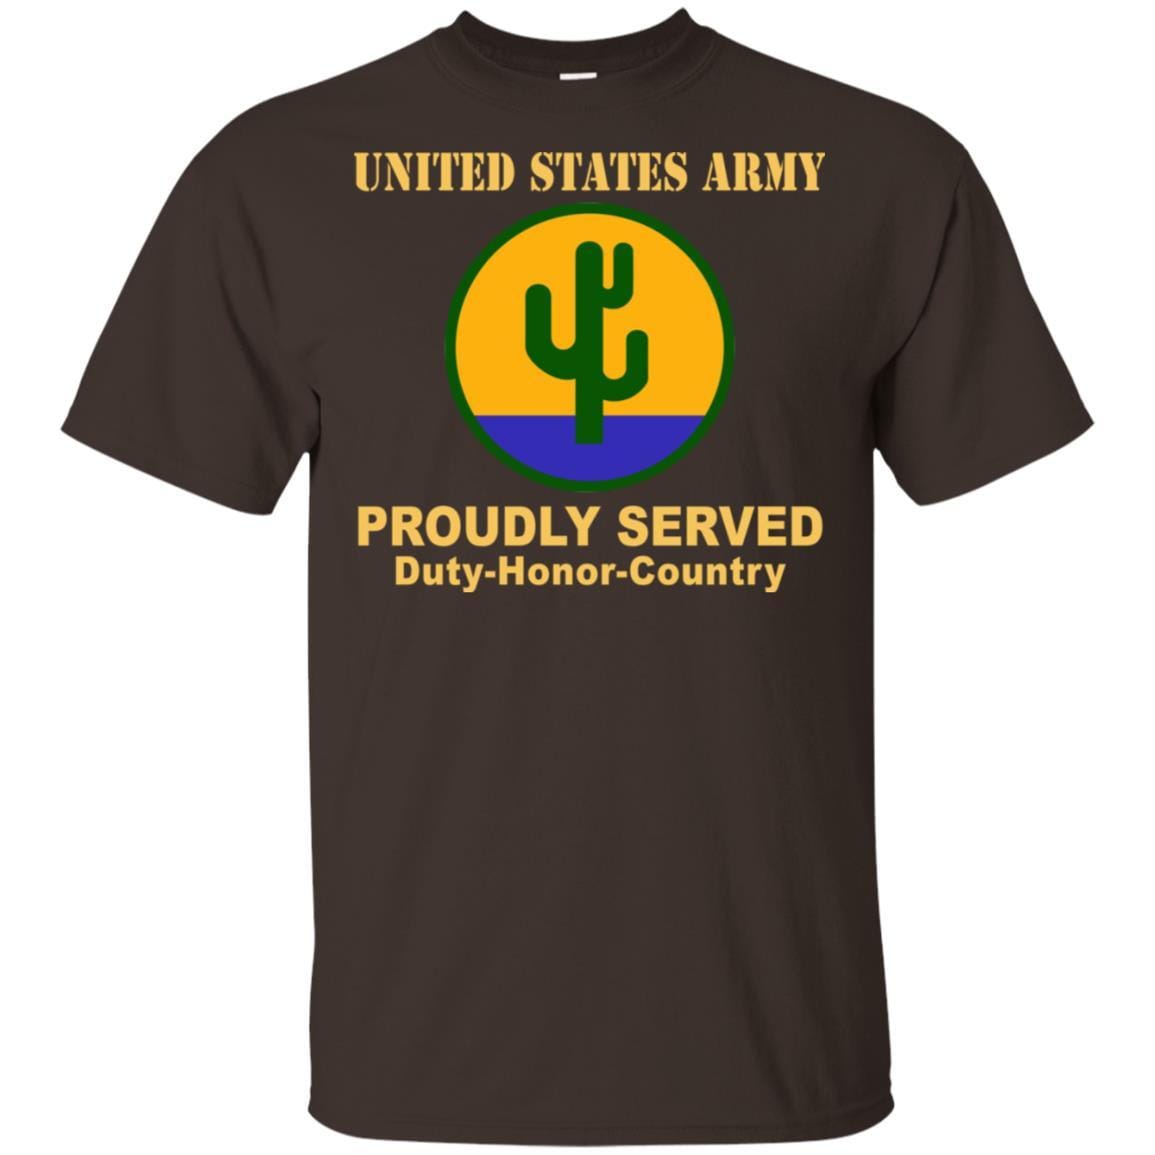 US ARMY 103 SUSTAINMENT COMMAND - Proudly Served T-Shirt On Front For Men-TShirt-Army-Veterans Nation